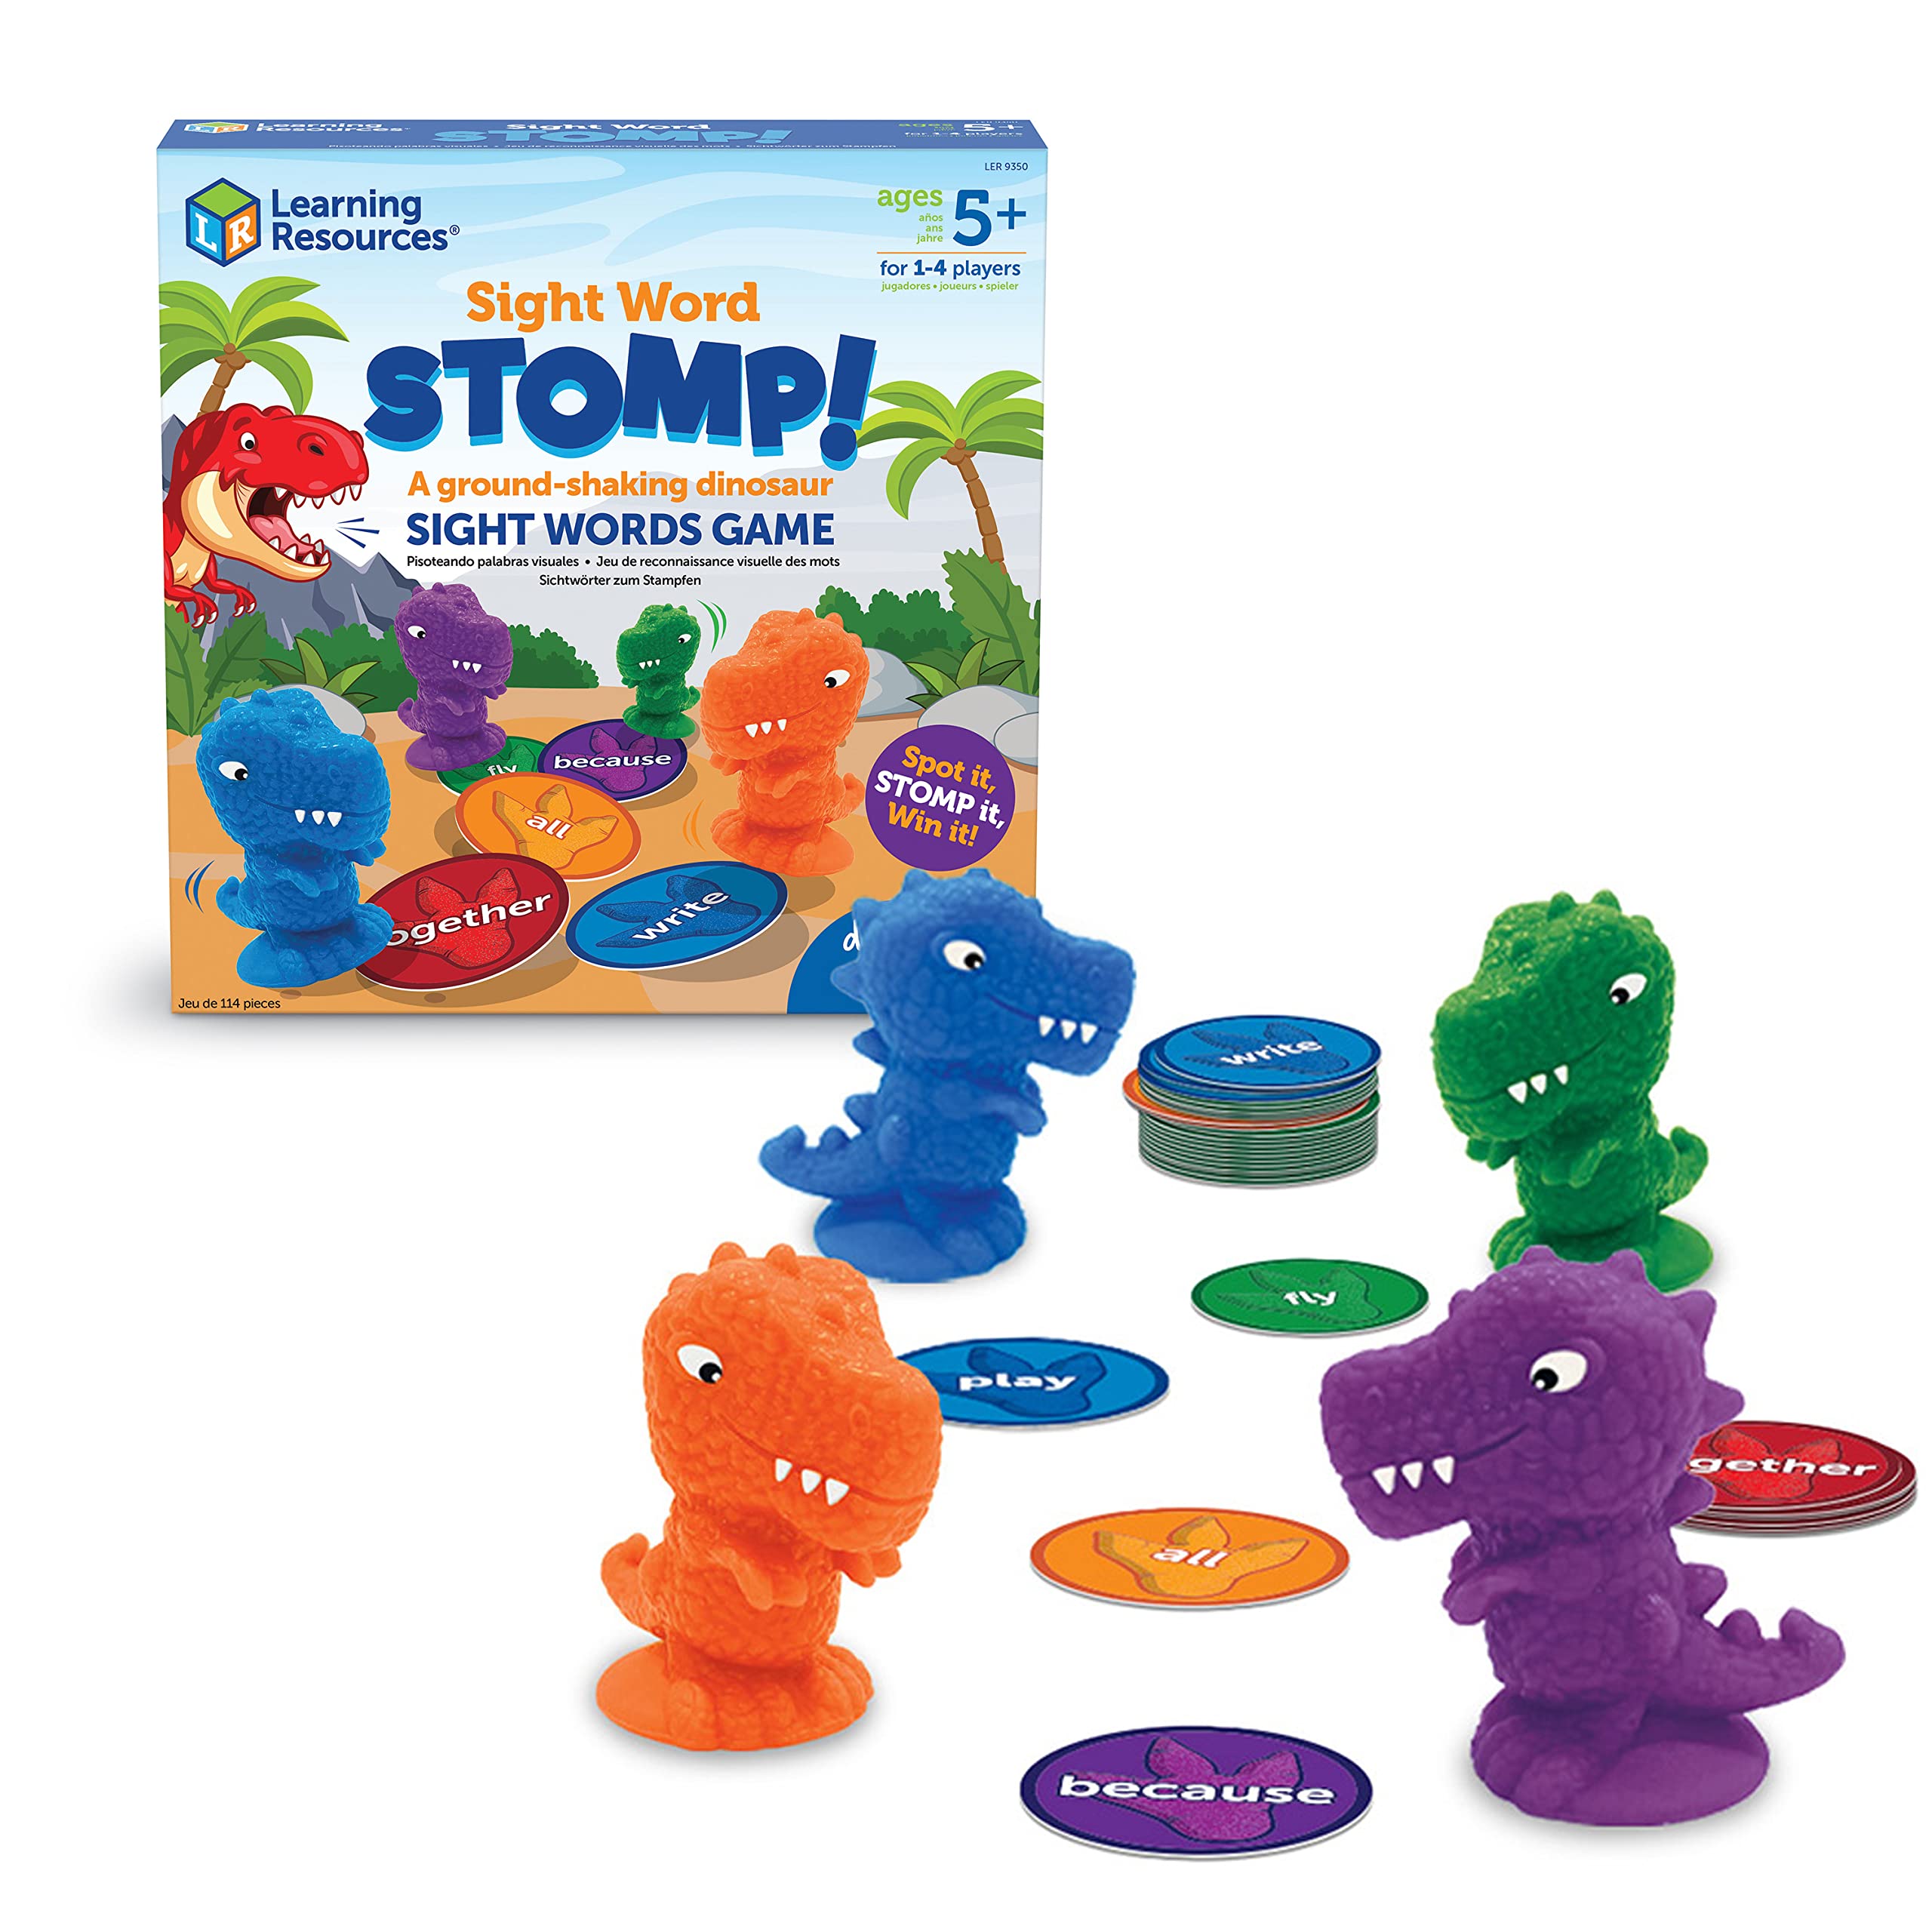 114-Piece Learning Resources Sight Word Stomp! Game $6.29 + Free Shipping w/ Prime or on orders over $35